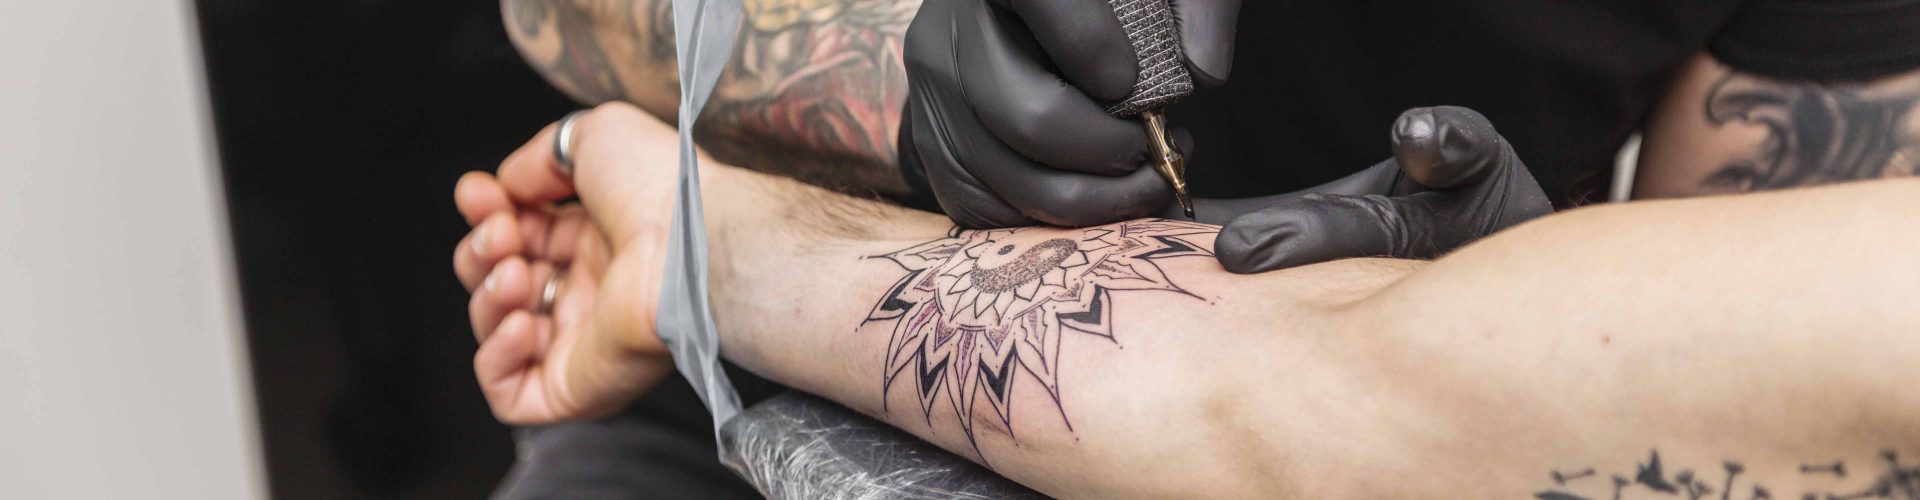 How to Become a Licensed Tattoo Artist in Canada, 2023 - Work Study Visa